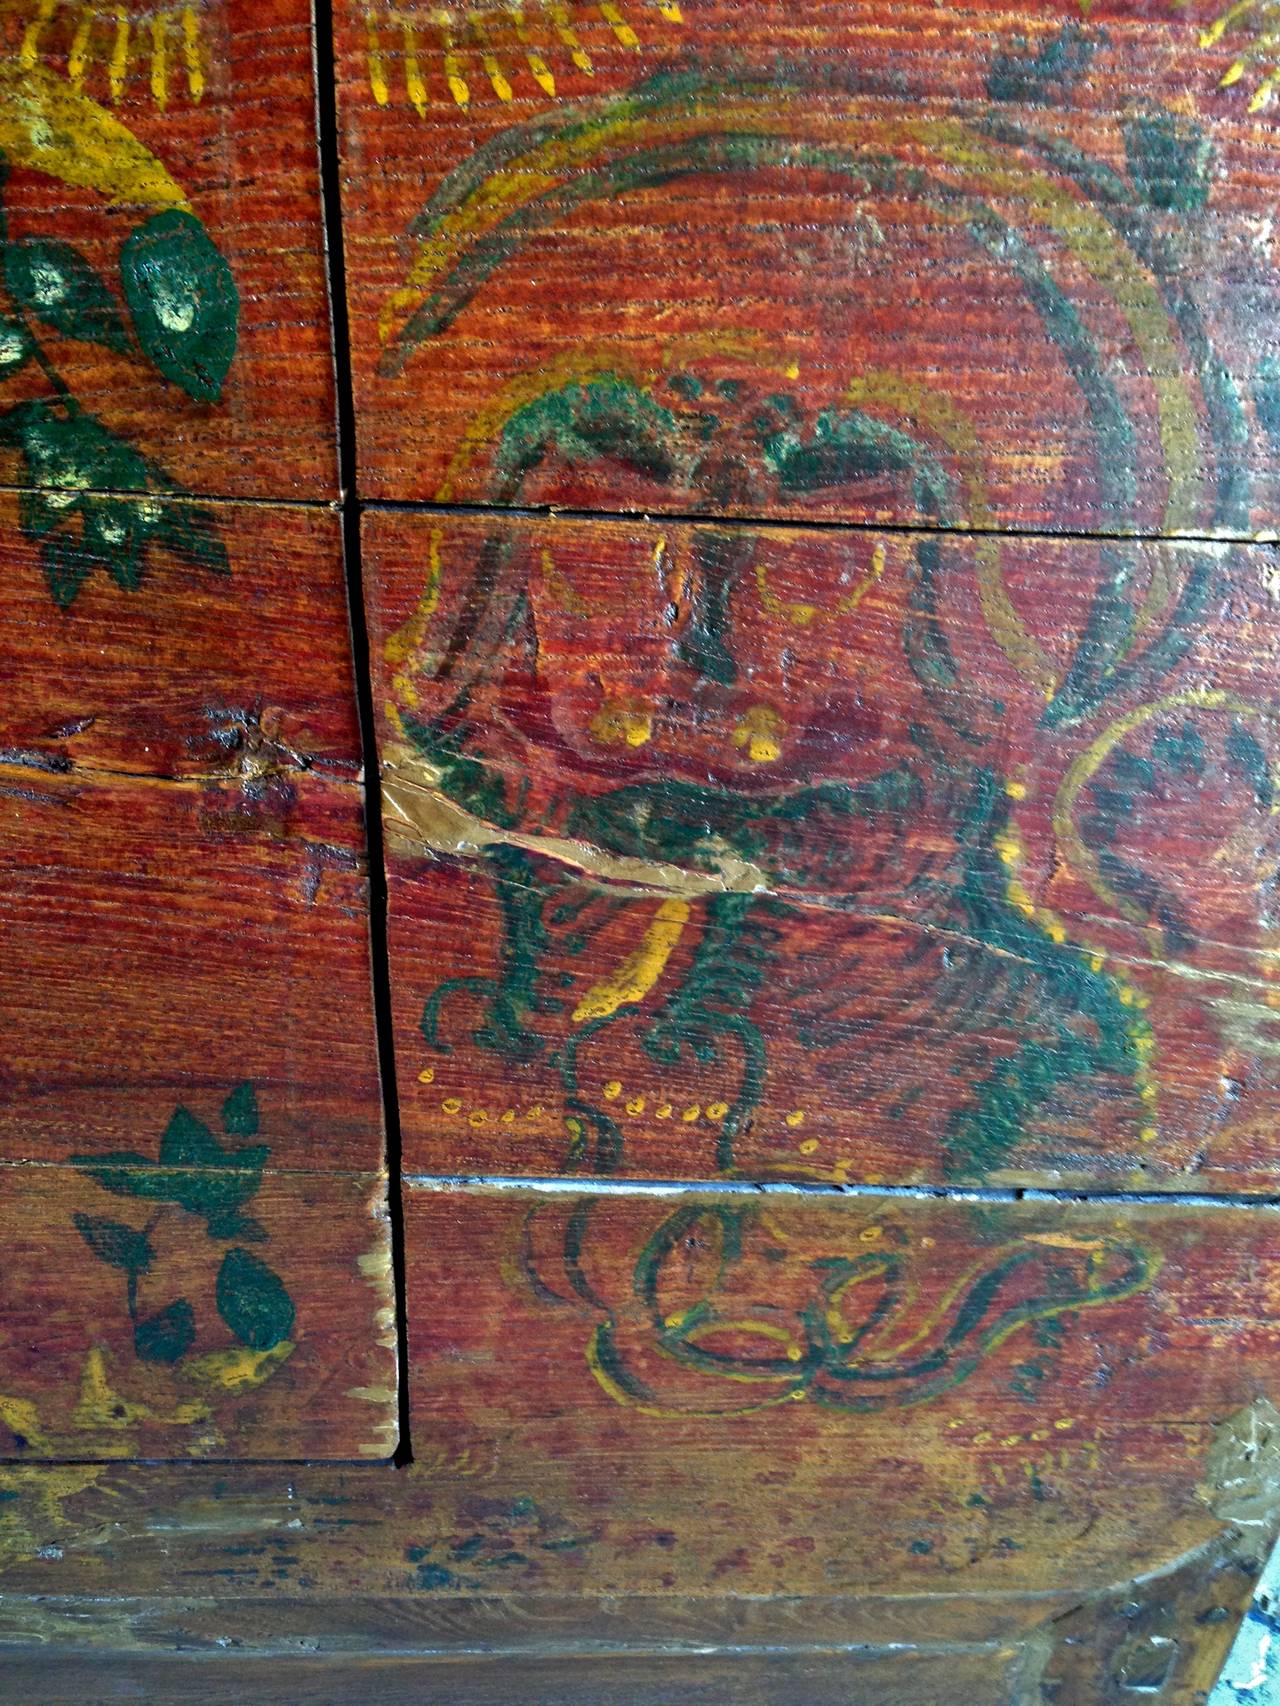 This wonderful piece exemplifies the rustic beauty of silk route region's furniture. Only solid single boards of wood were chosen for its construction. Exotic, folk artsy images are often found on furniture from that region. Here a pair of playful